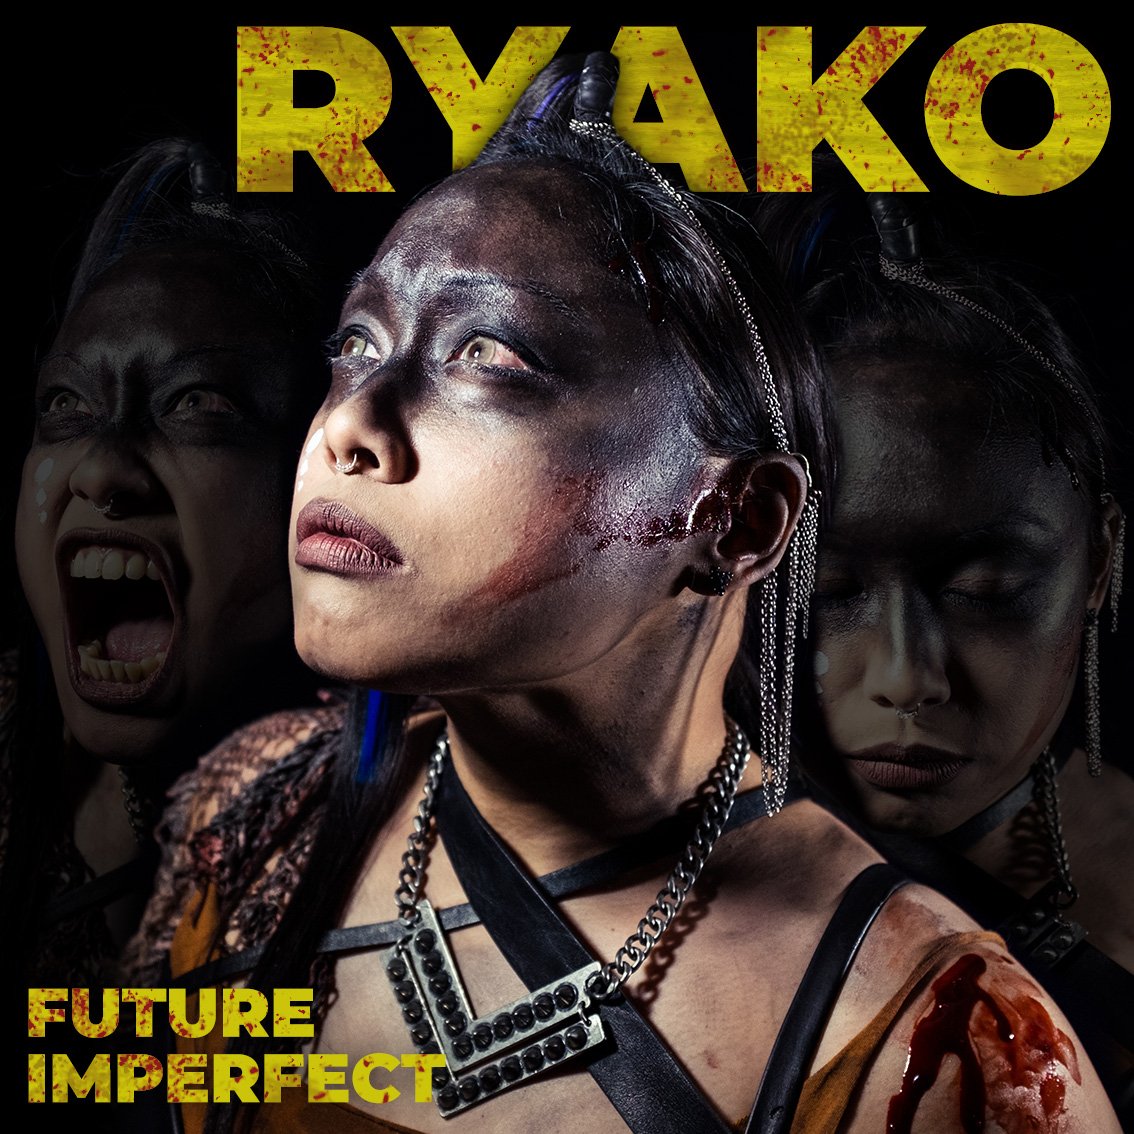 I have finally done it!  I have released my new EP, 'Future Imperfect'.  It's available on my bandcamp site! #WitnessMe !

ryako.bandcamp.com/album/future-i…

#Nerdcore #geek #nerd #GeekGirl #LadyProducer #dystopian #scifi #genrebending